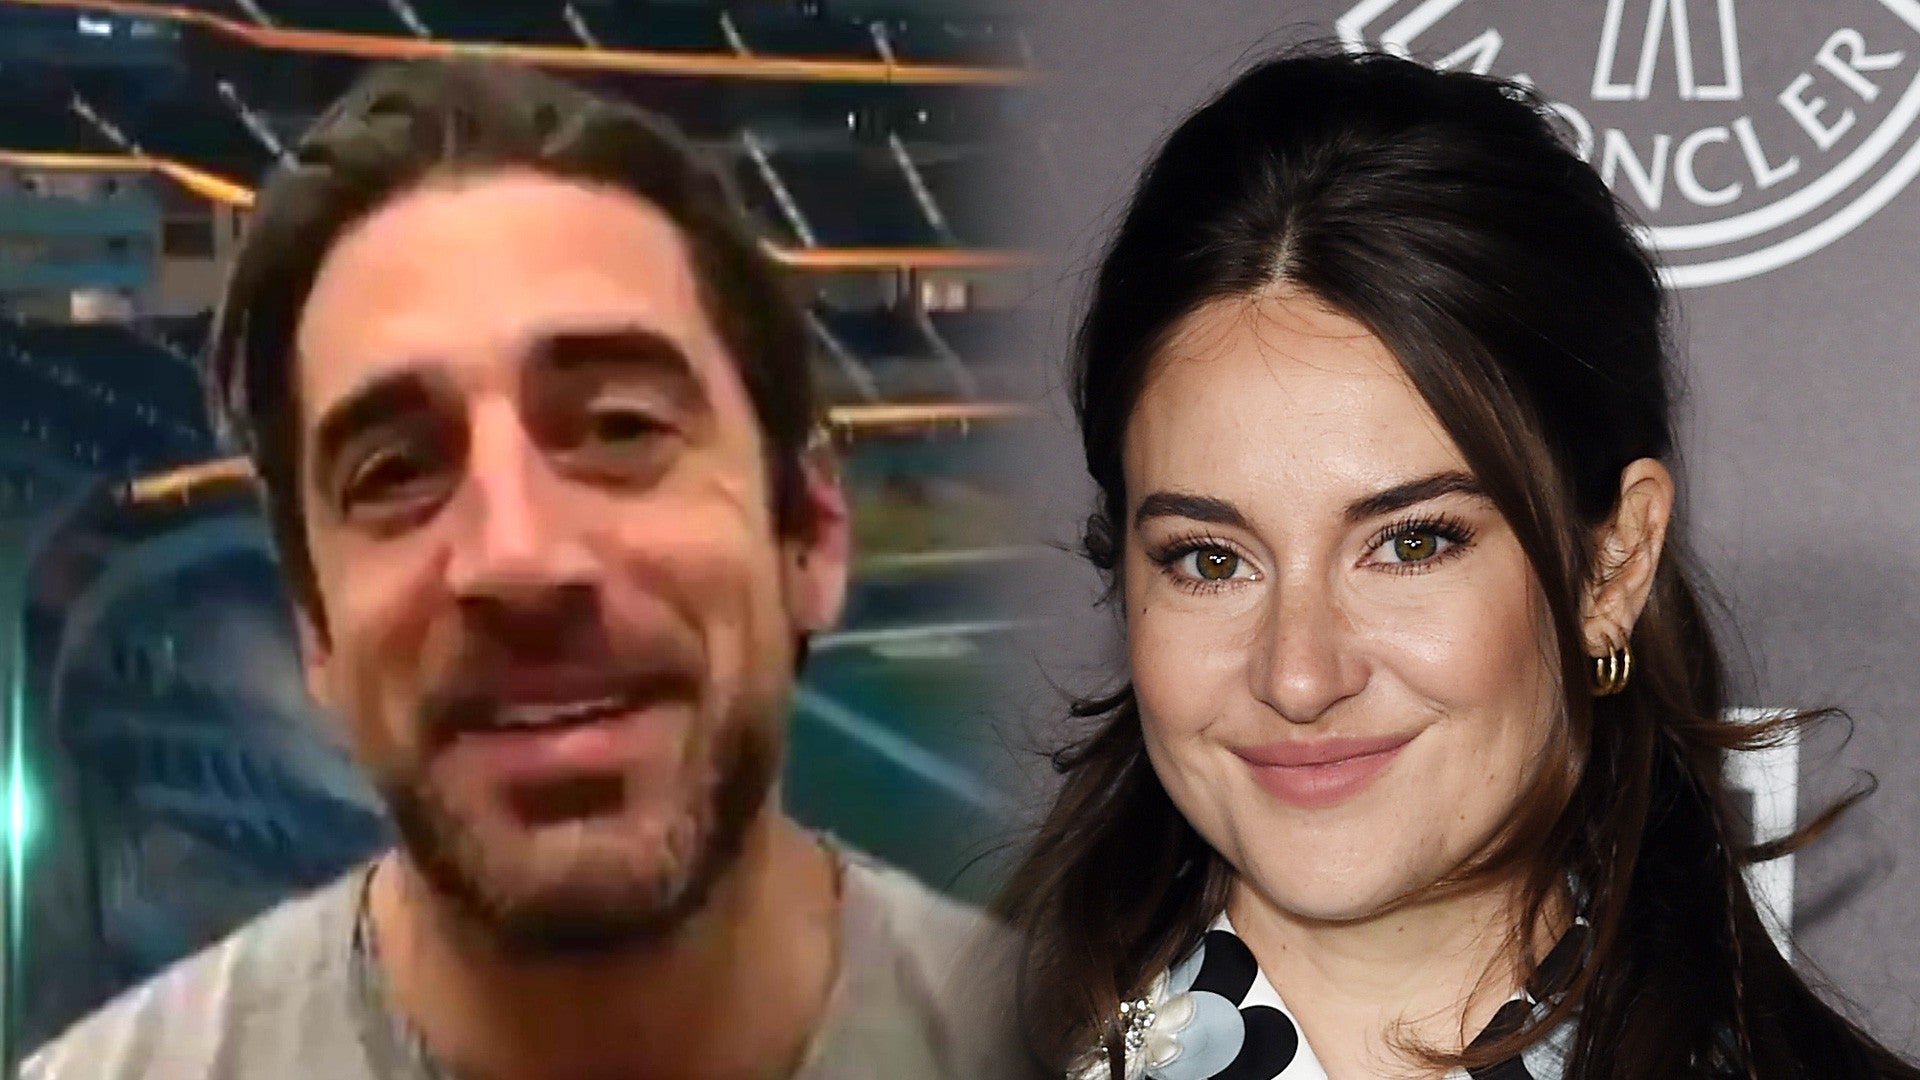 Shailene Woodley moved in with Aaron Rodgers 'immediately'